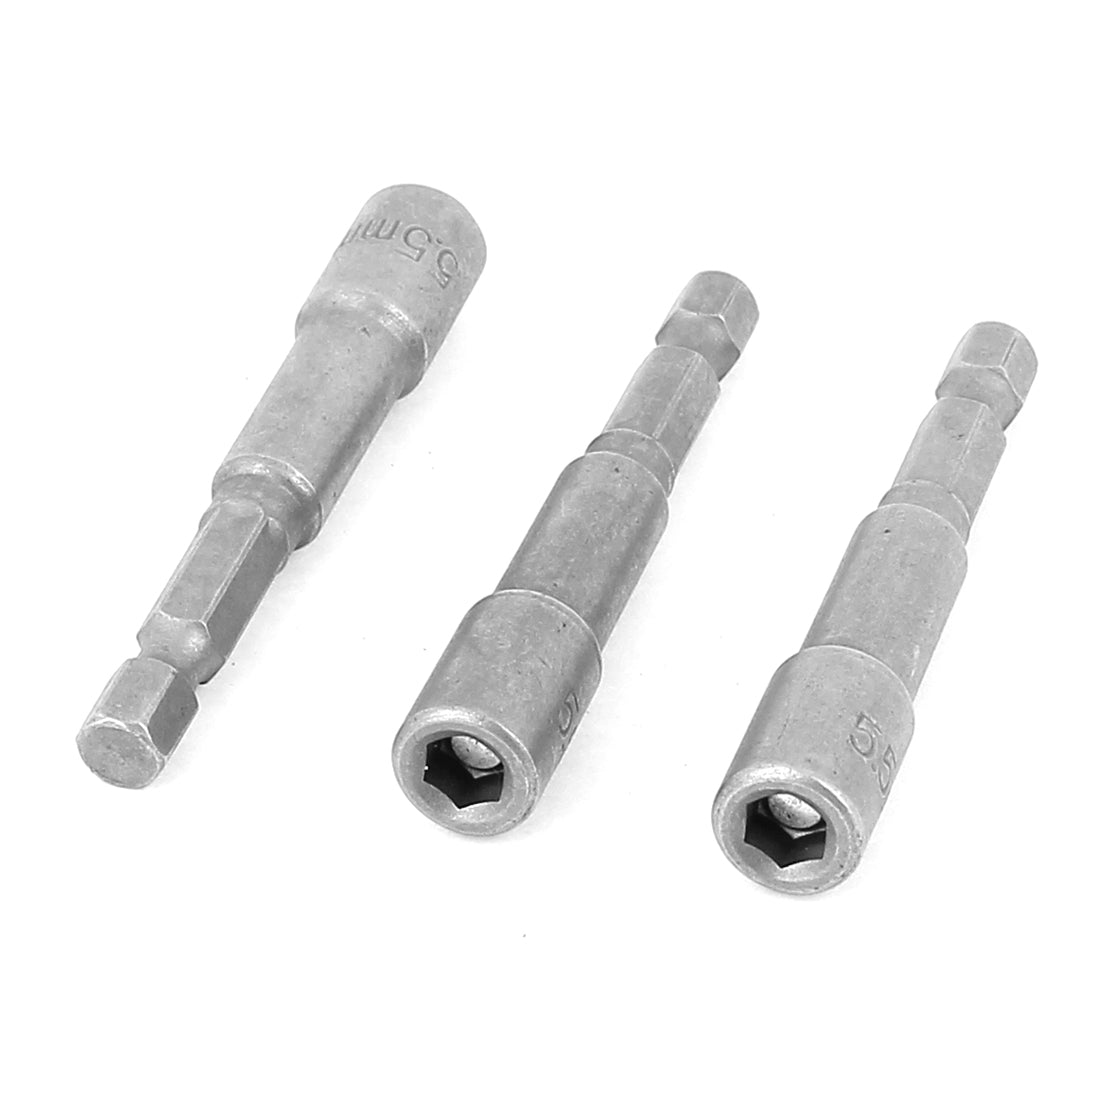 uxcell Uxcell 3 Pcs 65mm Length 5.5mm Hex Socket Driver Bit Metal Shank Magnetic Nuts Setter